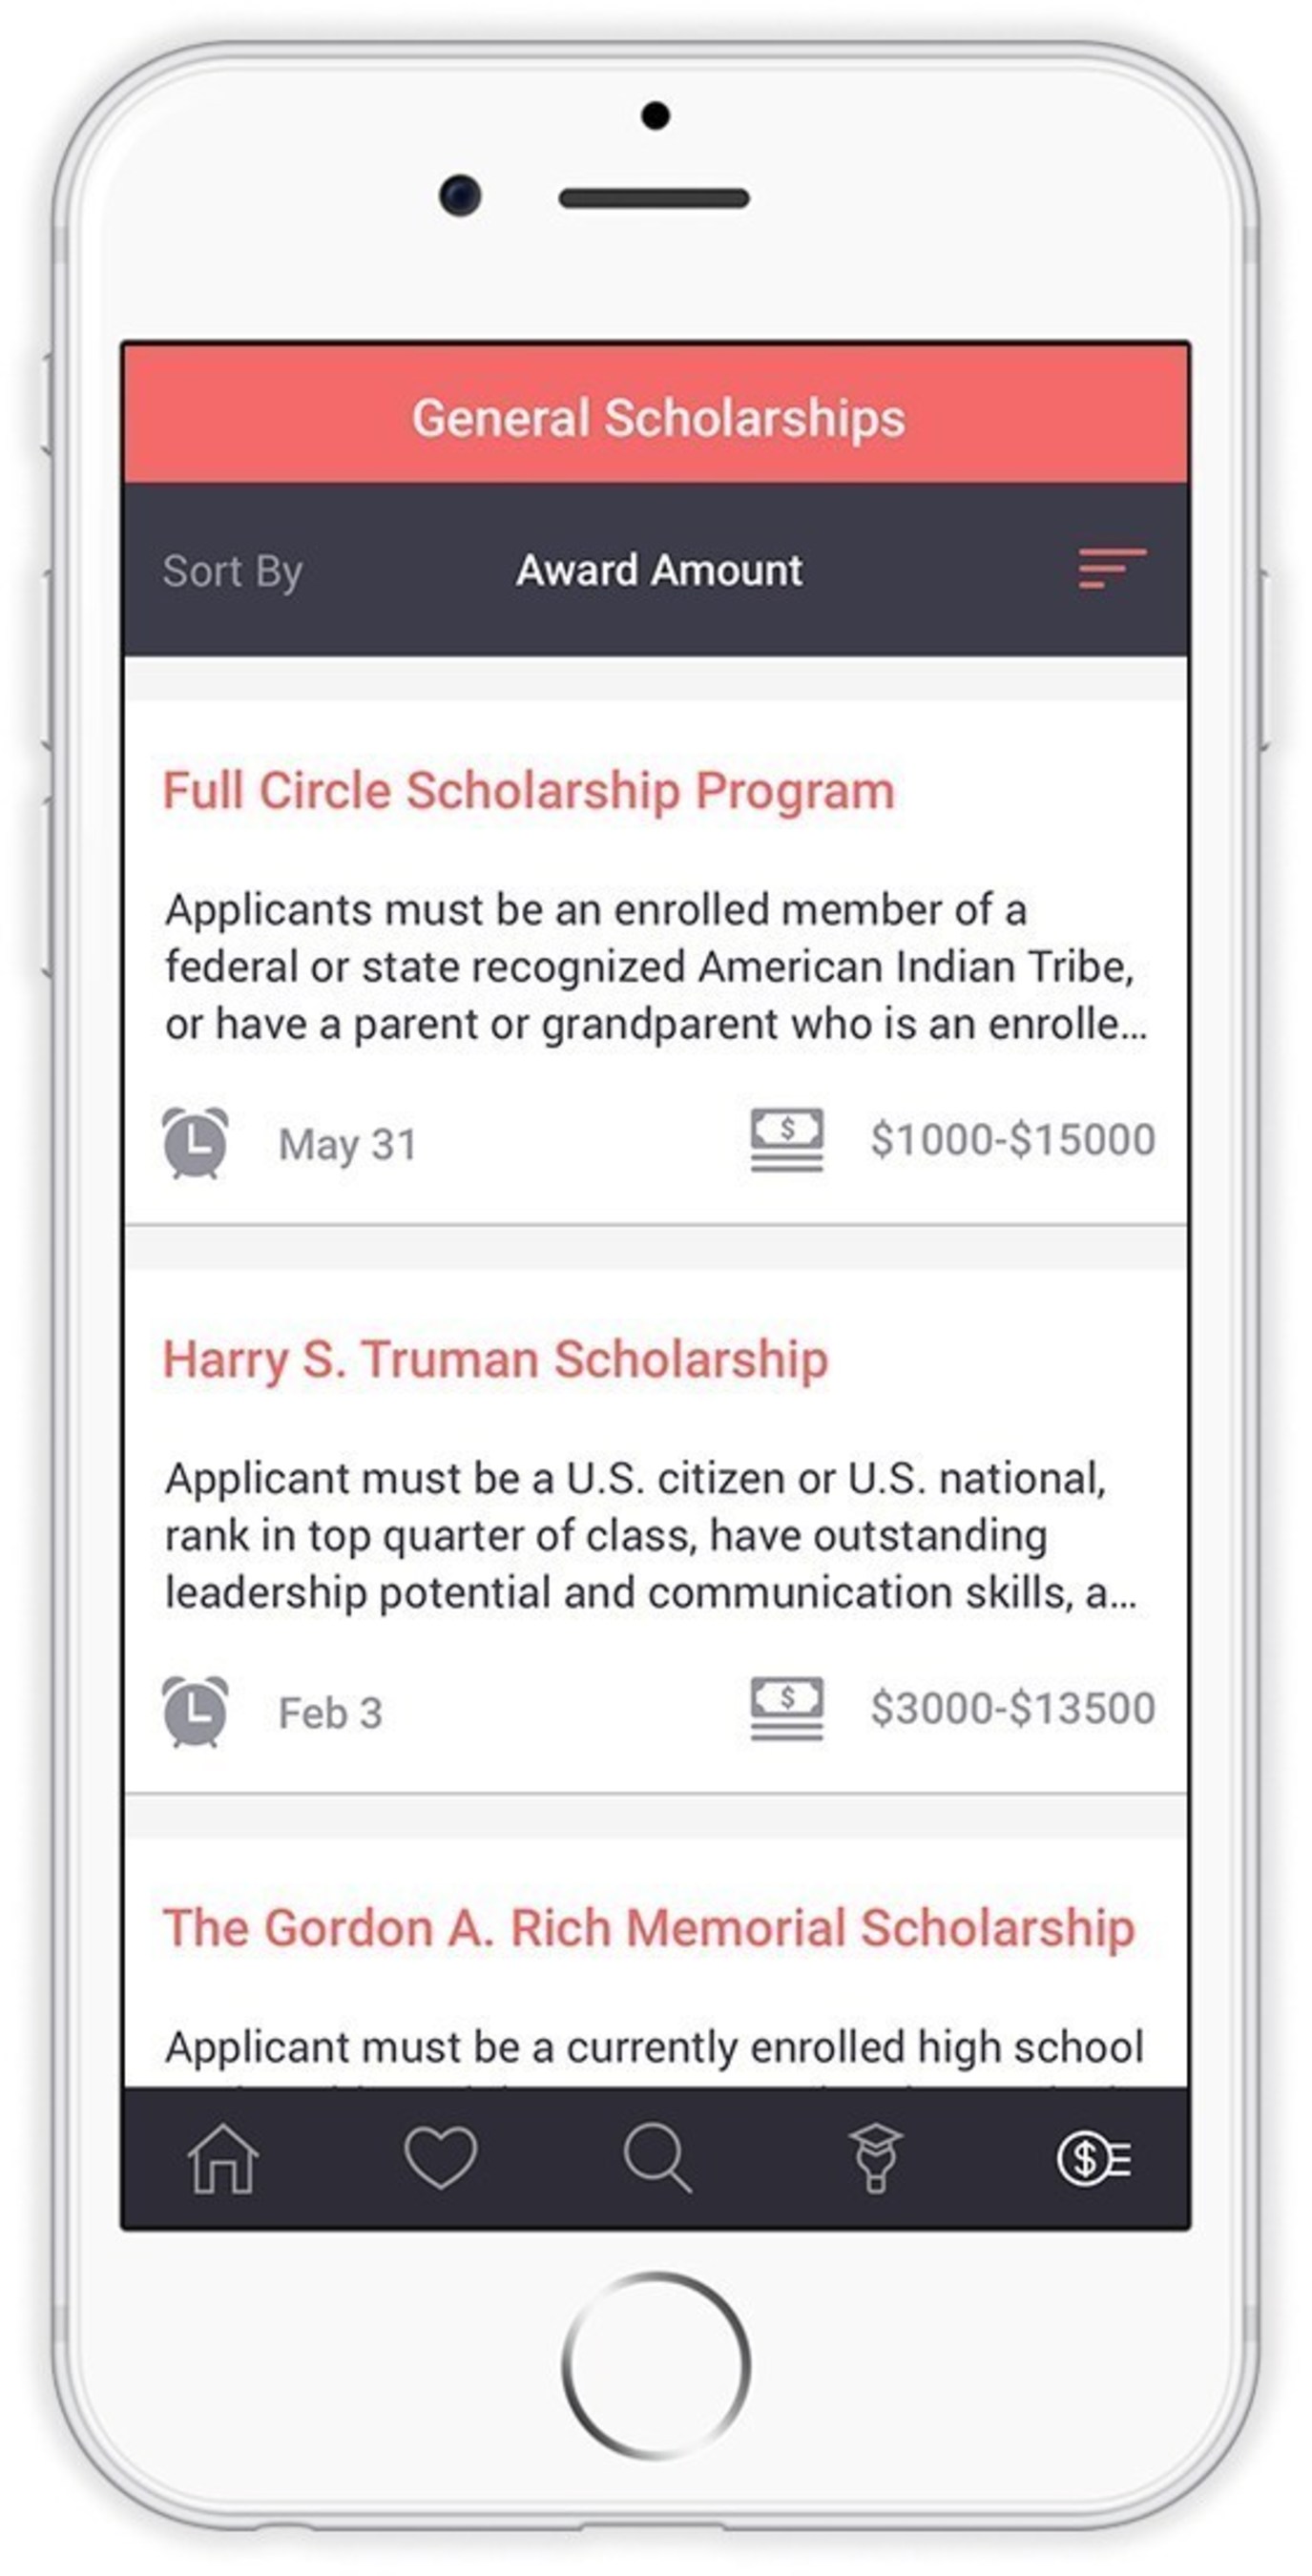 Schoold's scholarship feature displays relevant scholarships that can be sorted by amount or deadline.